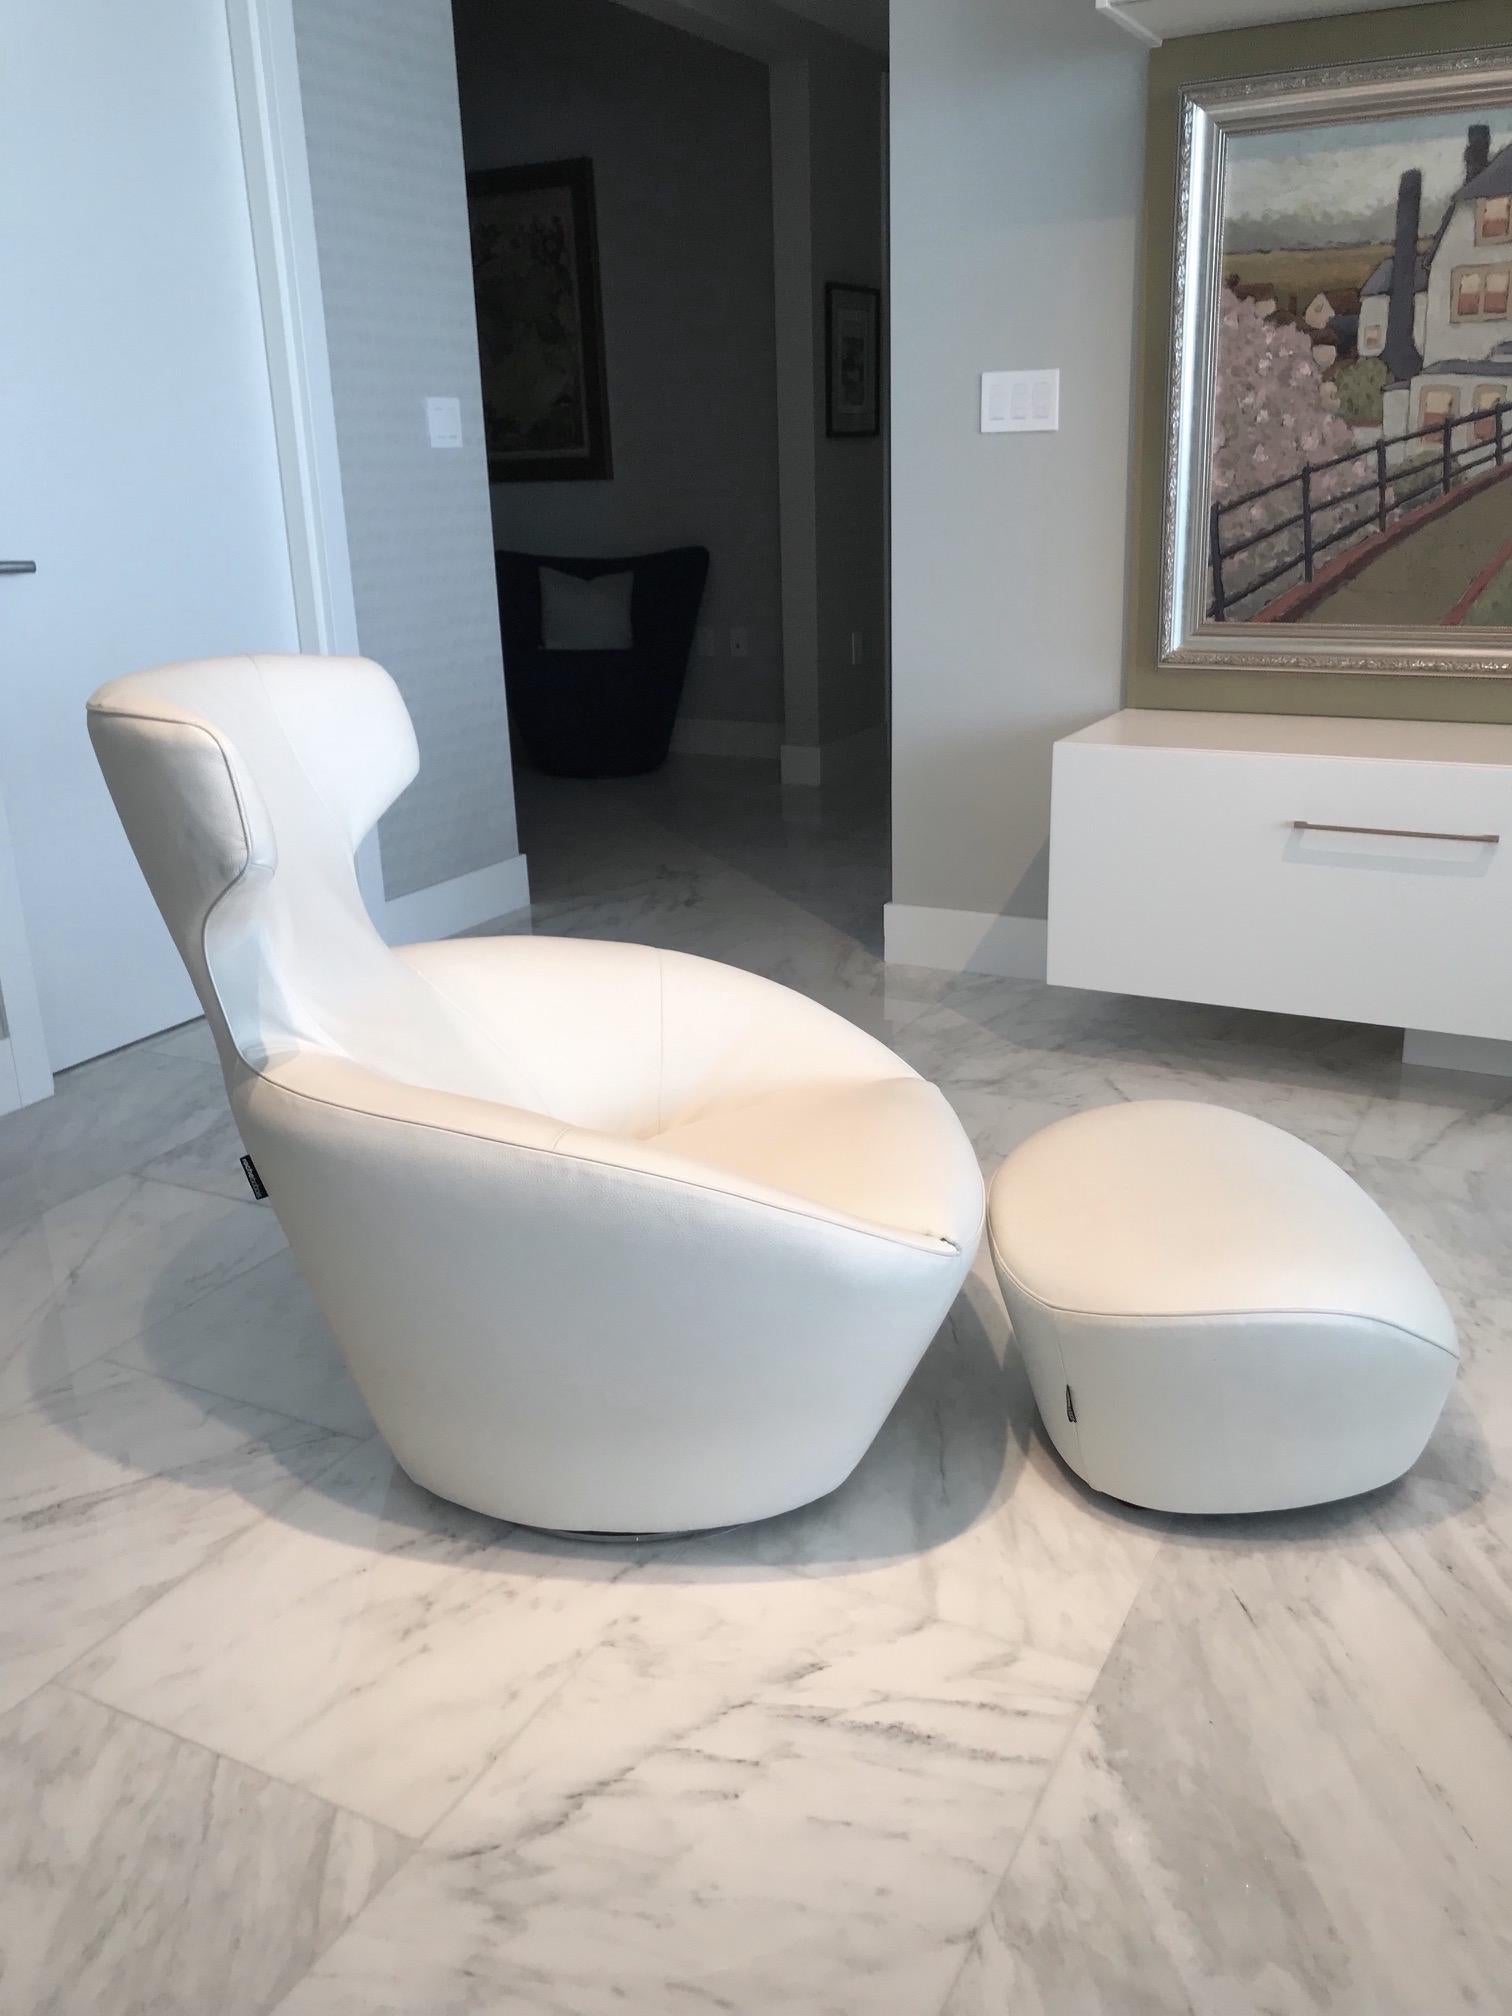 Ultra luxury lounge chair in custom ordered white leather, with matching ottoman. From the Edito series designed by Sacha Lakic for Roche Bobois. Chair has Mid-Century Modern inspired form reminiscent of Space Age designs. Features pivoting swivel